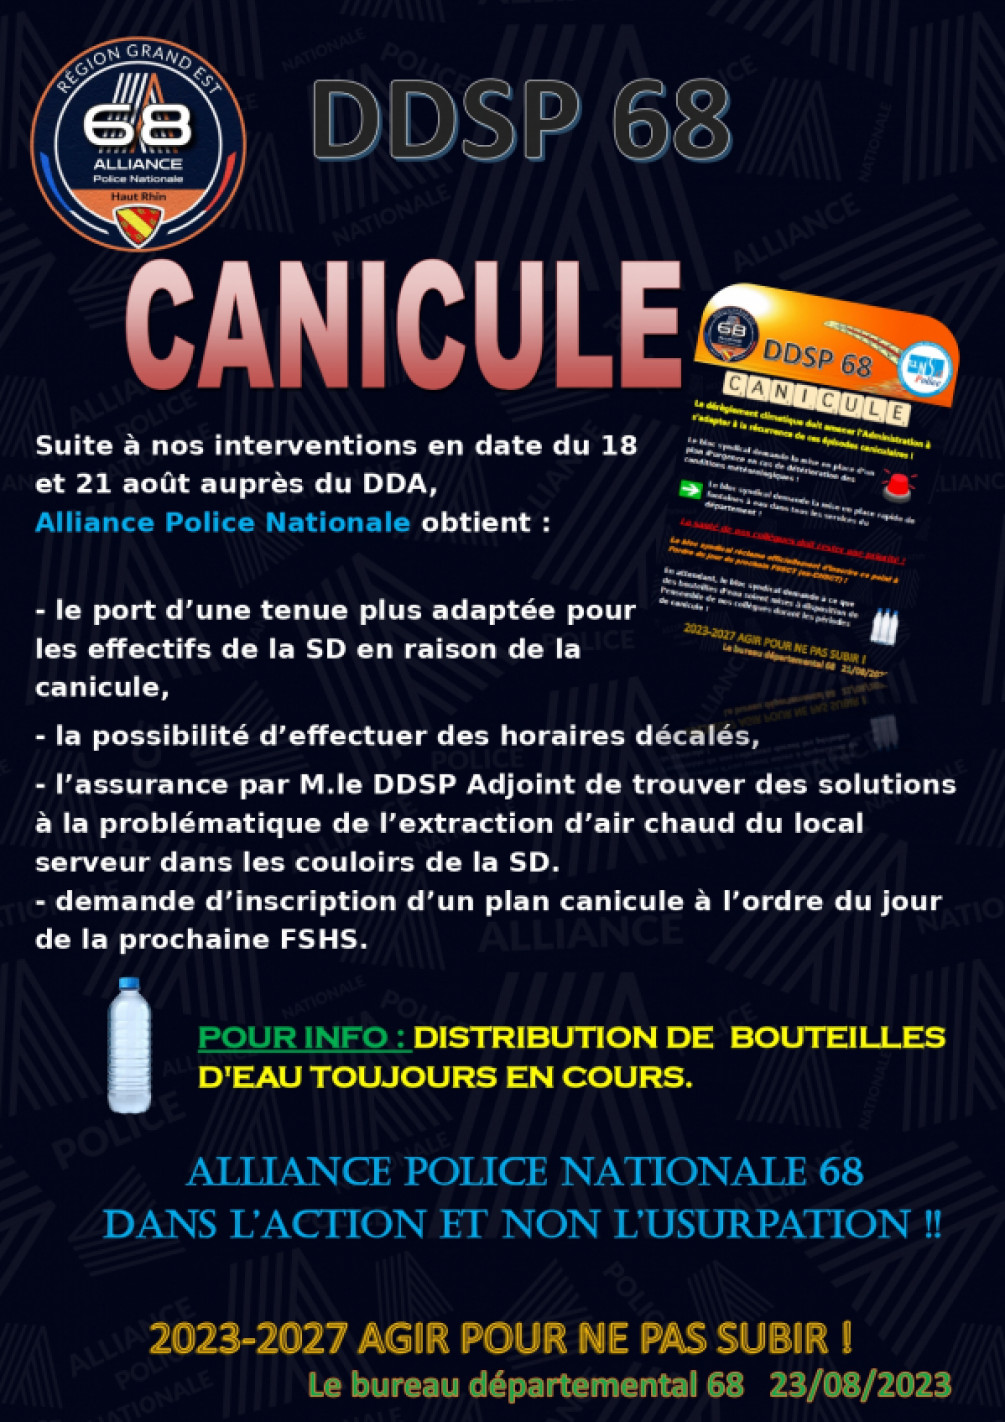 canicule DDSP 68 suite